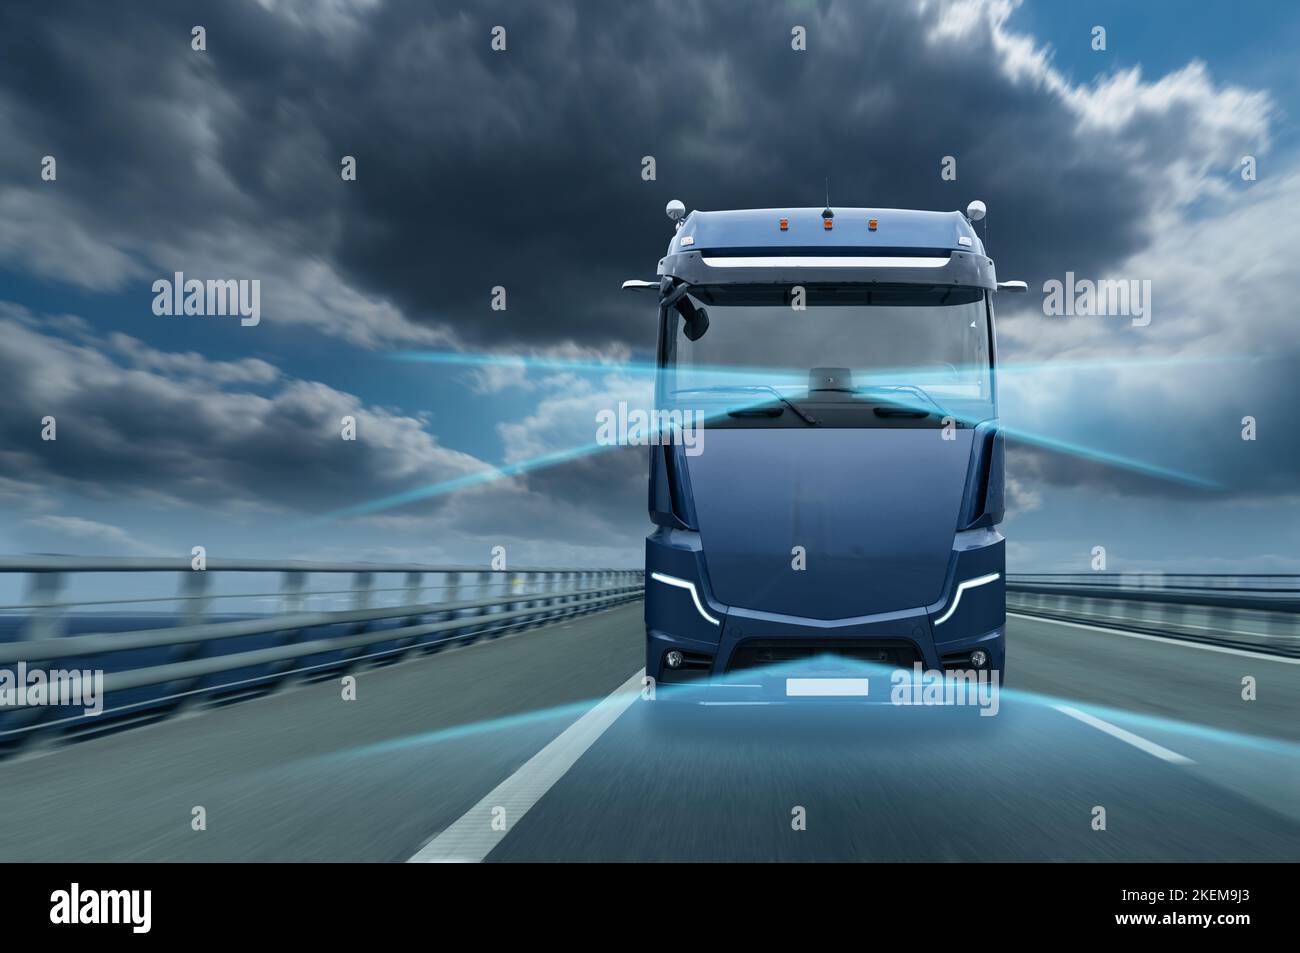 Machine vision system of an autonomous self driving truck. Stock Photo